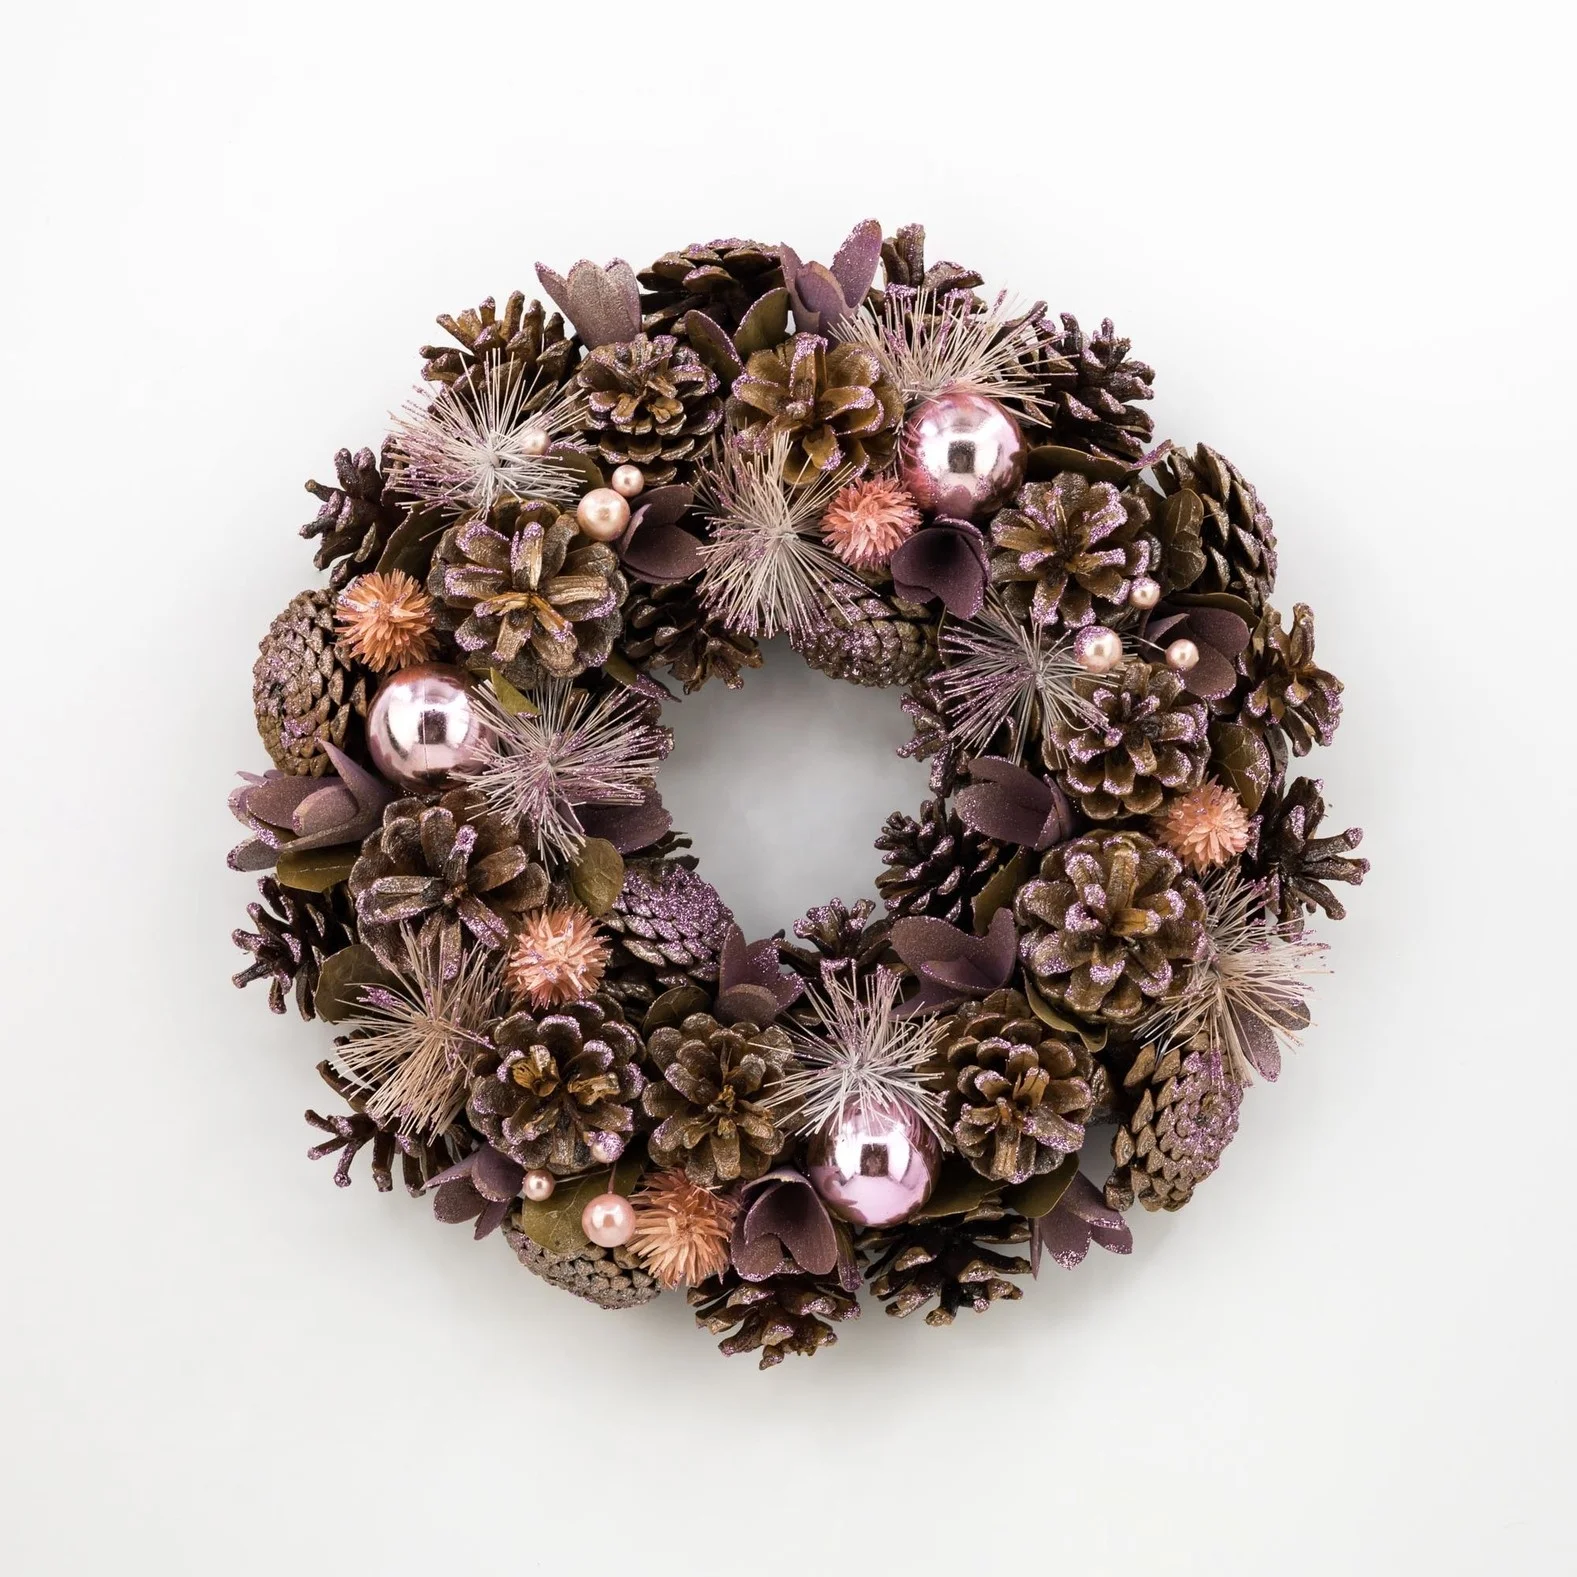 Natural Touch Home Decor Wreath Supplies Wholesale Xmas Pinecone Christmas Wreaths for home decoration